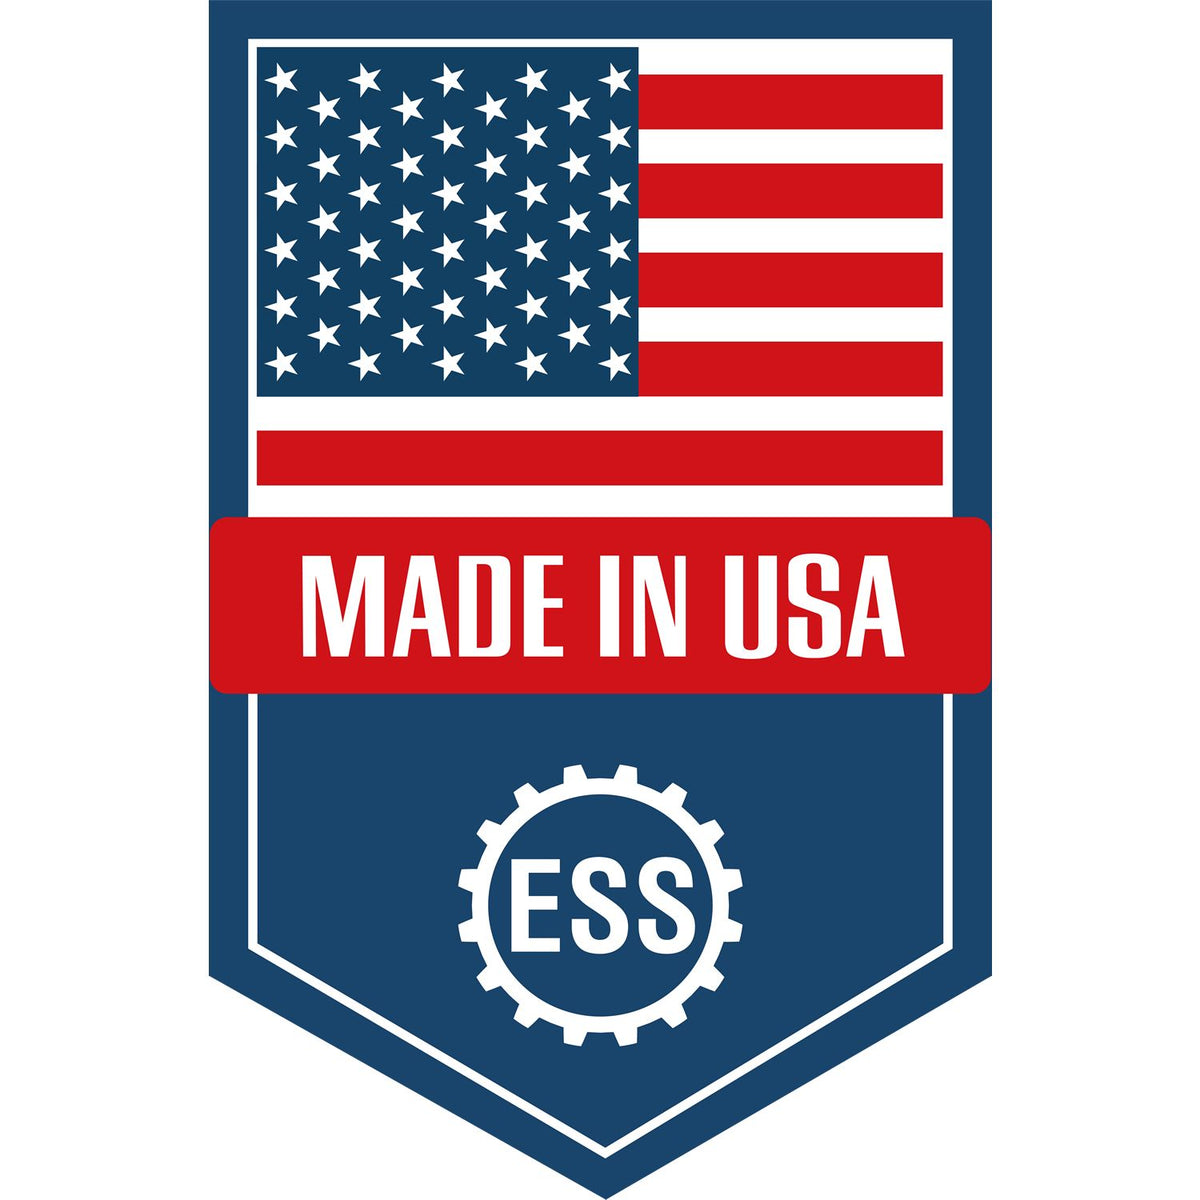 An icon or graphic with an american flag and text reading Made in USA for the Premium MaxLight Pre-Inked Indiana Landscape Architectural Stamp